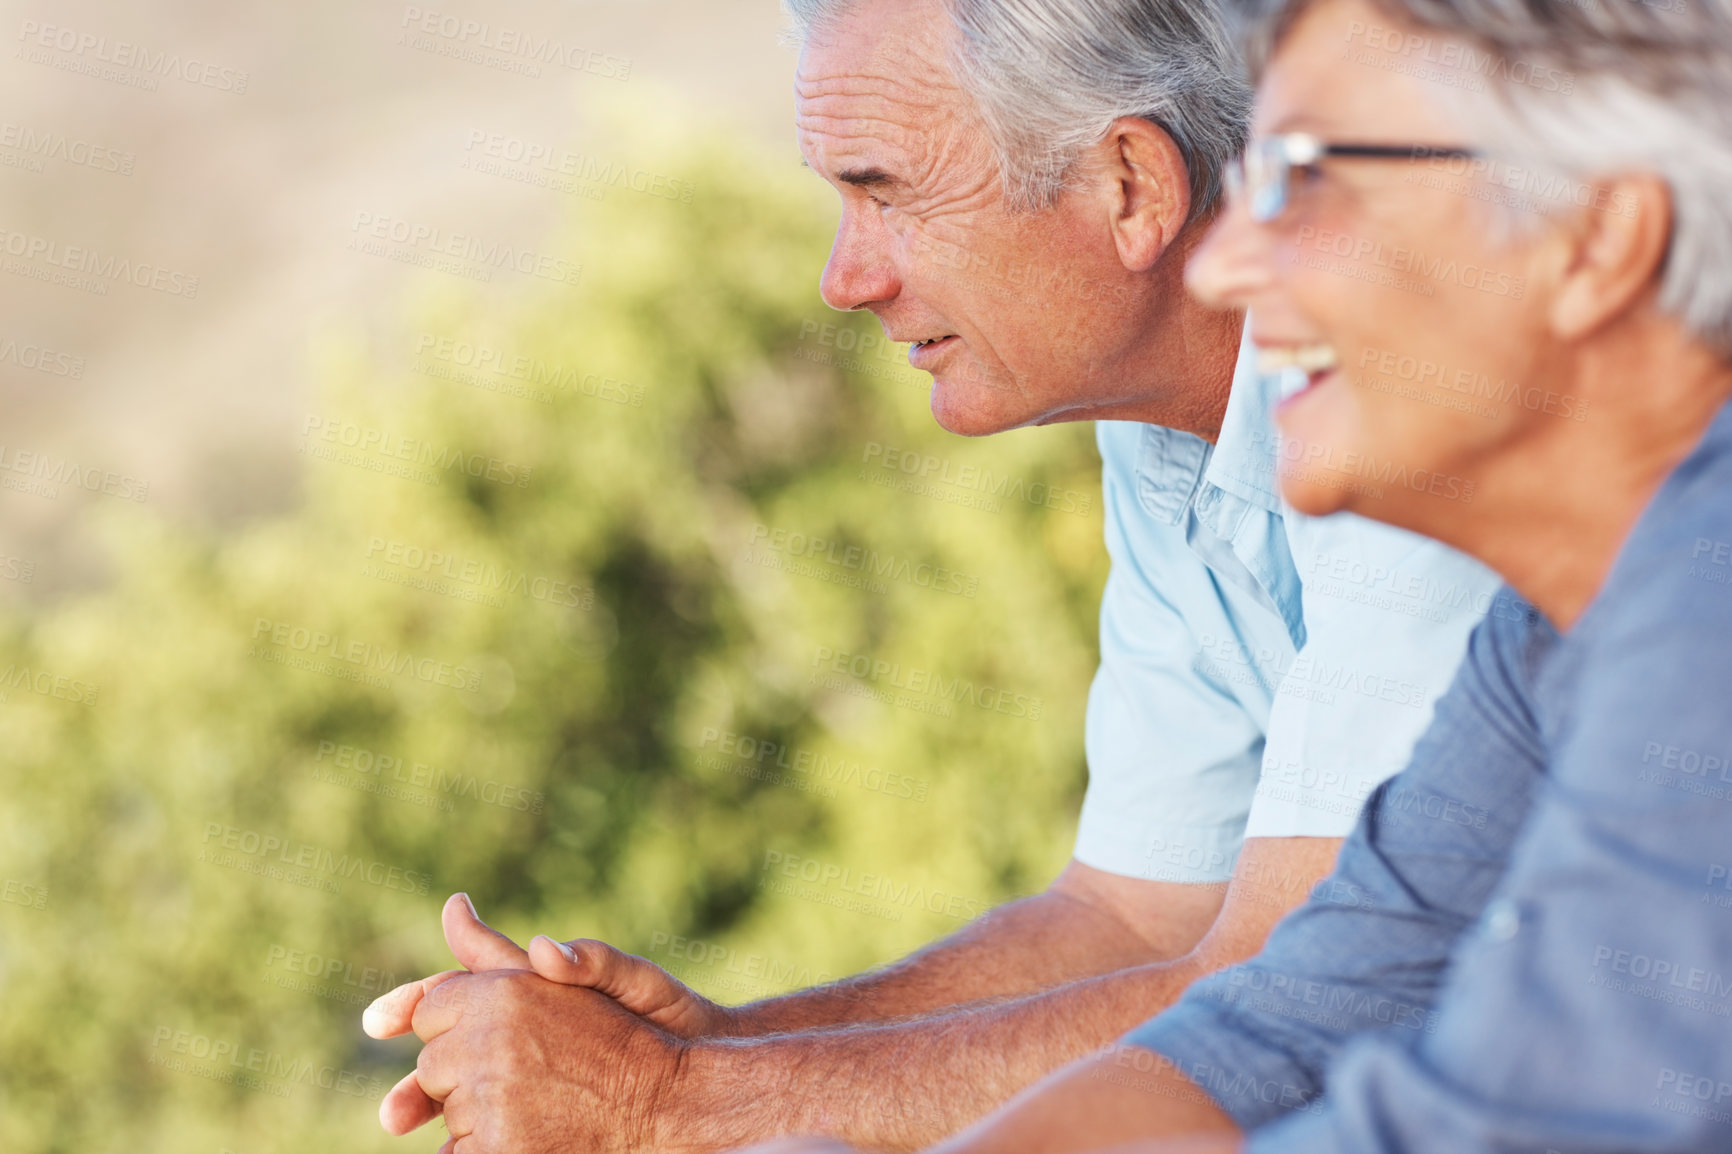 Buy stock photo Focus on smiling mature man enjoying view from balcony with cheerful woman